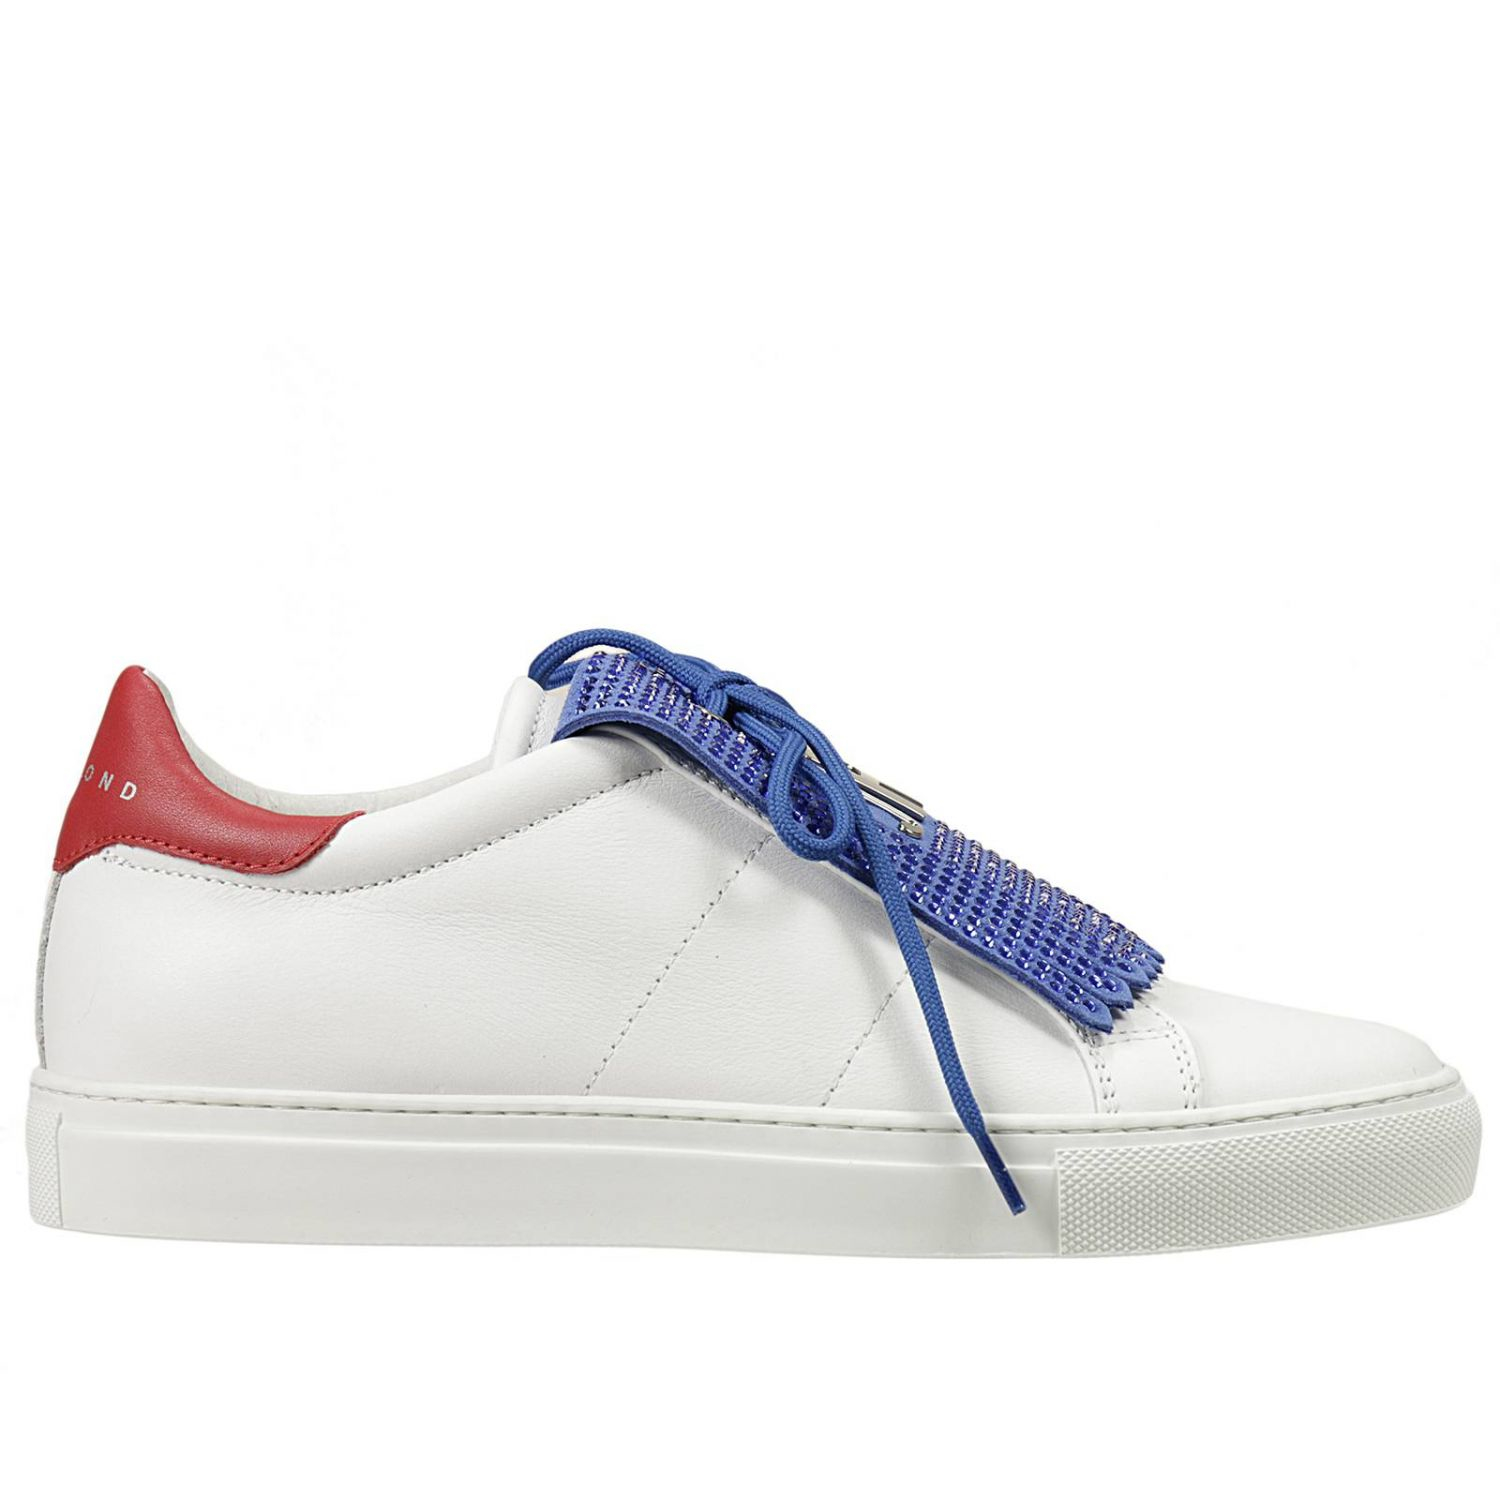 Lyst - John Richmond Sneakers Leather in White